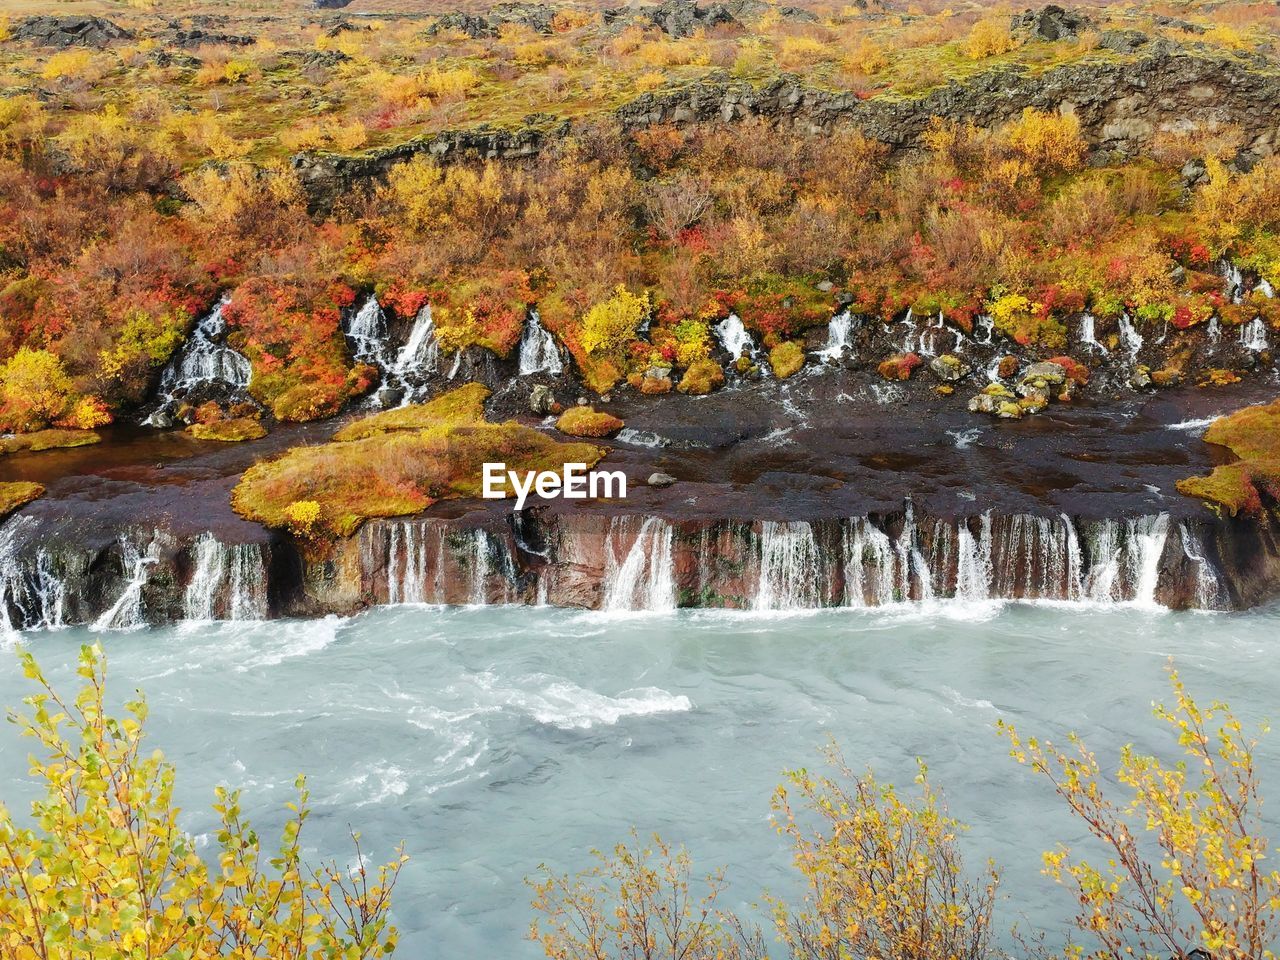 Hraunfossar waterfall with fall colors